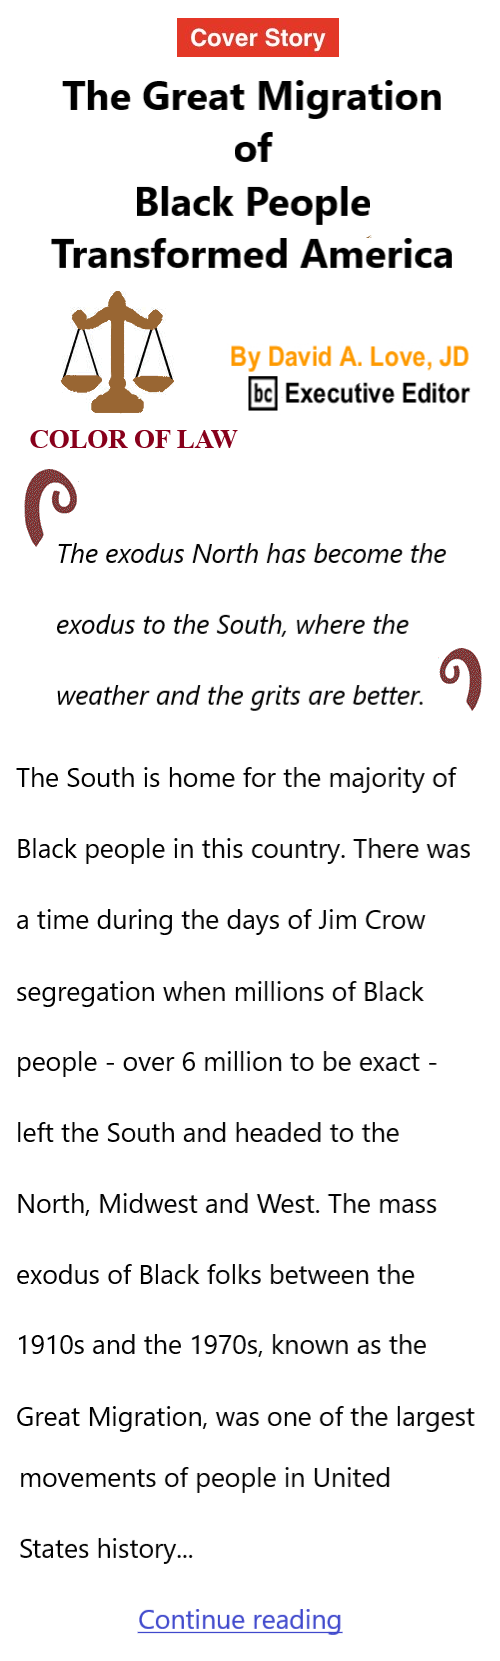 BlackCommentator.com Apr 25, 2024 - Issue 998: Cover Story - The Great Migration of Black People Transformed America - Color of Law By David A. Love, JD, BC Executive Editor